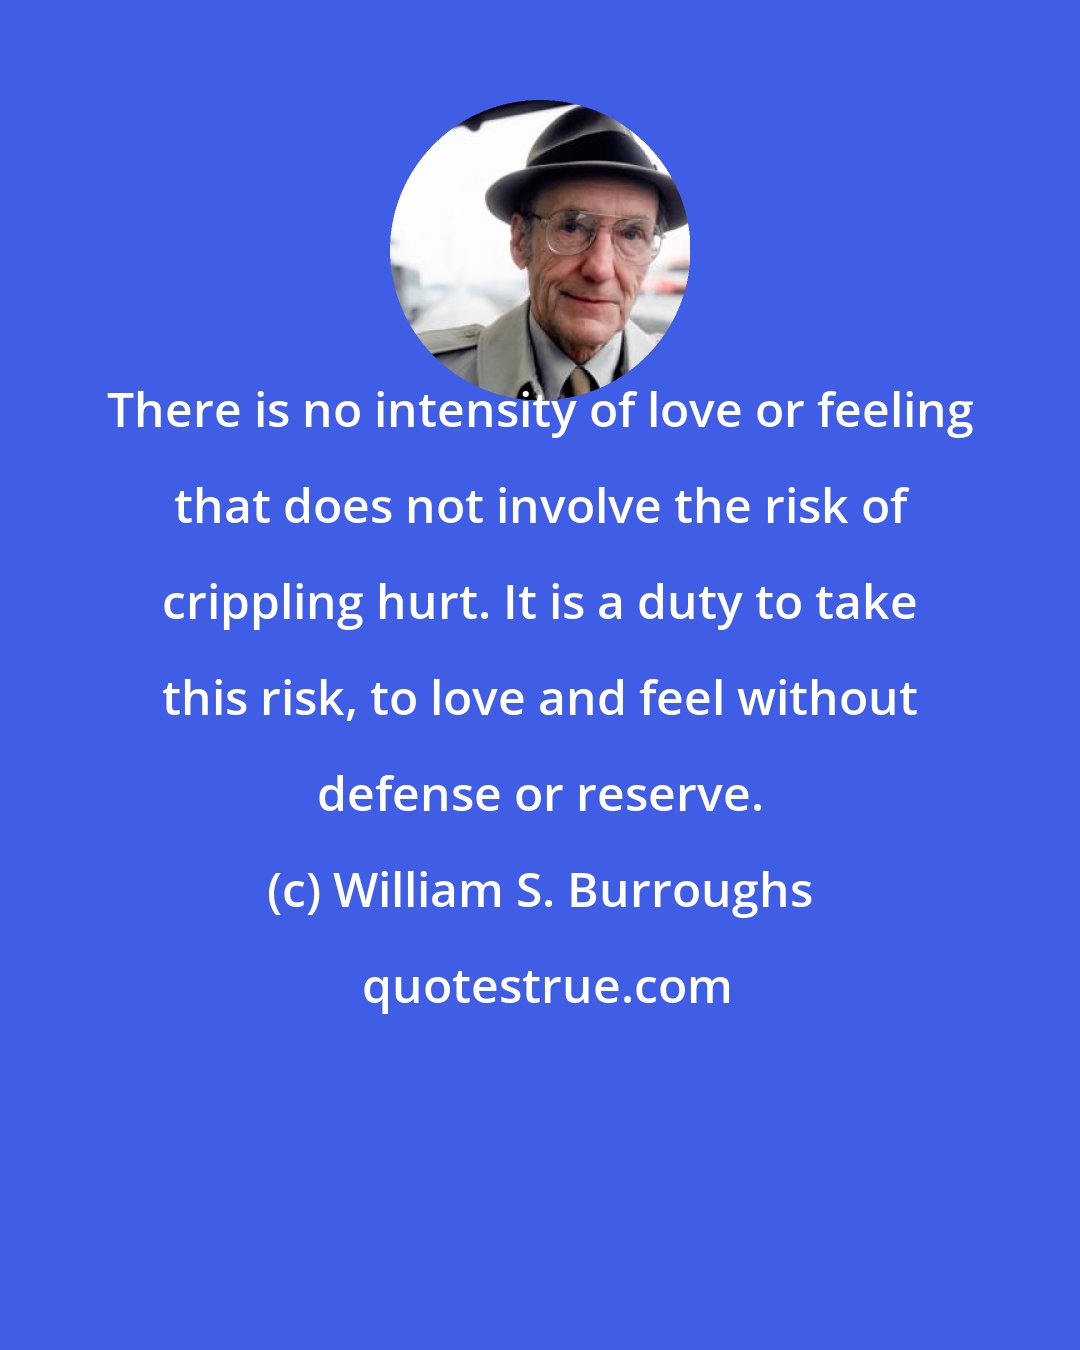 William S. Burroughs: There is no intensity of love or feeling that does not involve the risk of crippling hurt. It is a duty to take this risk, to love and feel without defense or reserve.